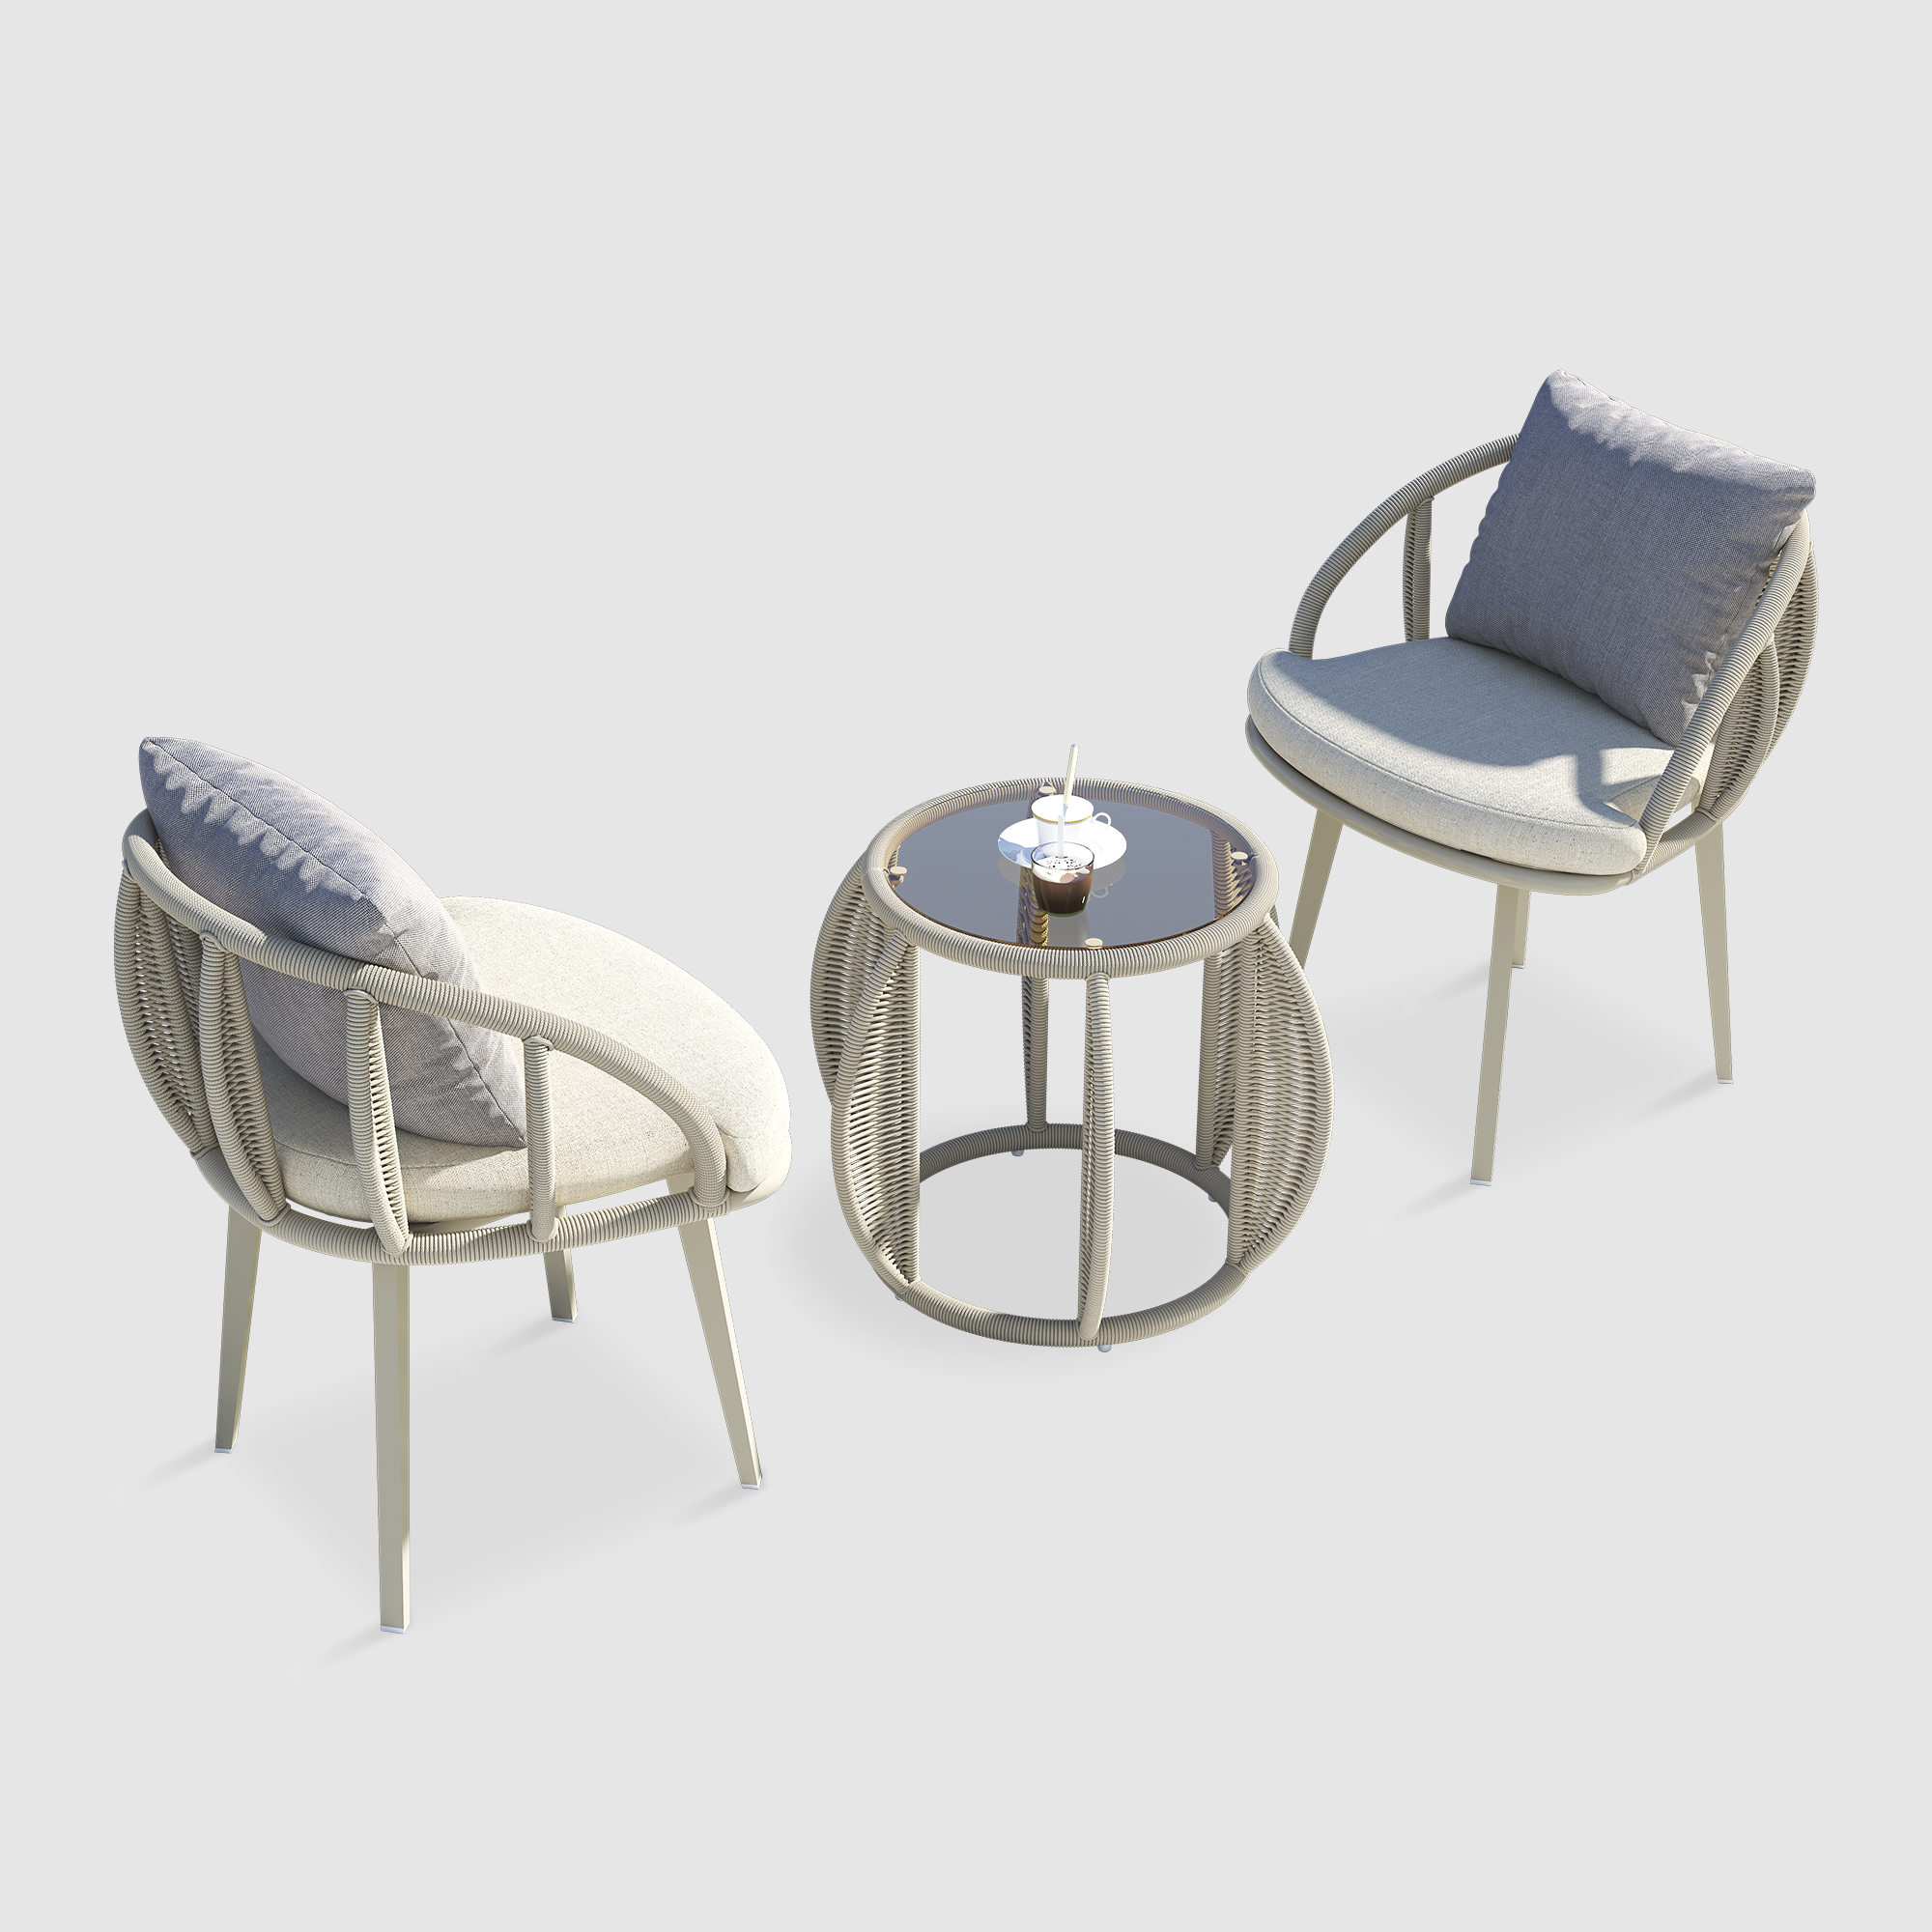 Hotel Design Patio Outdoor Furniture Rope Table And Chairs